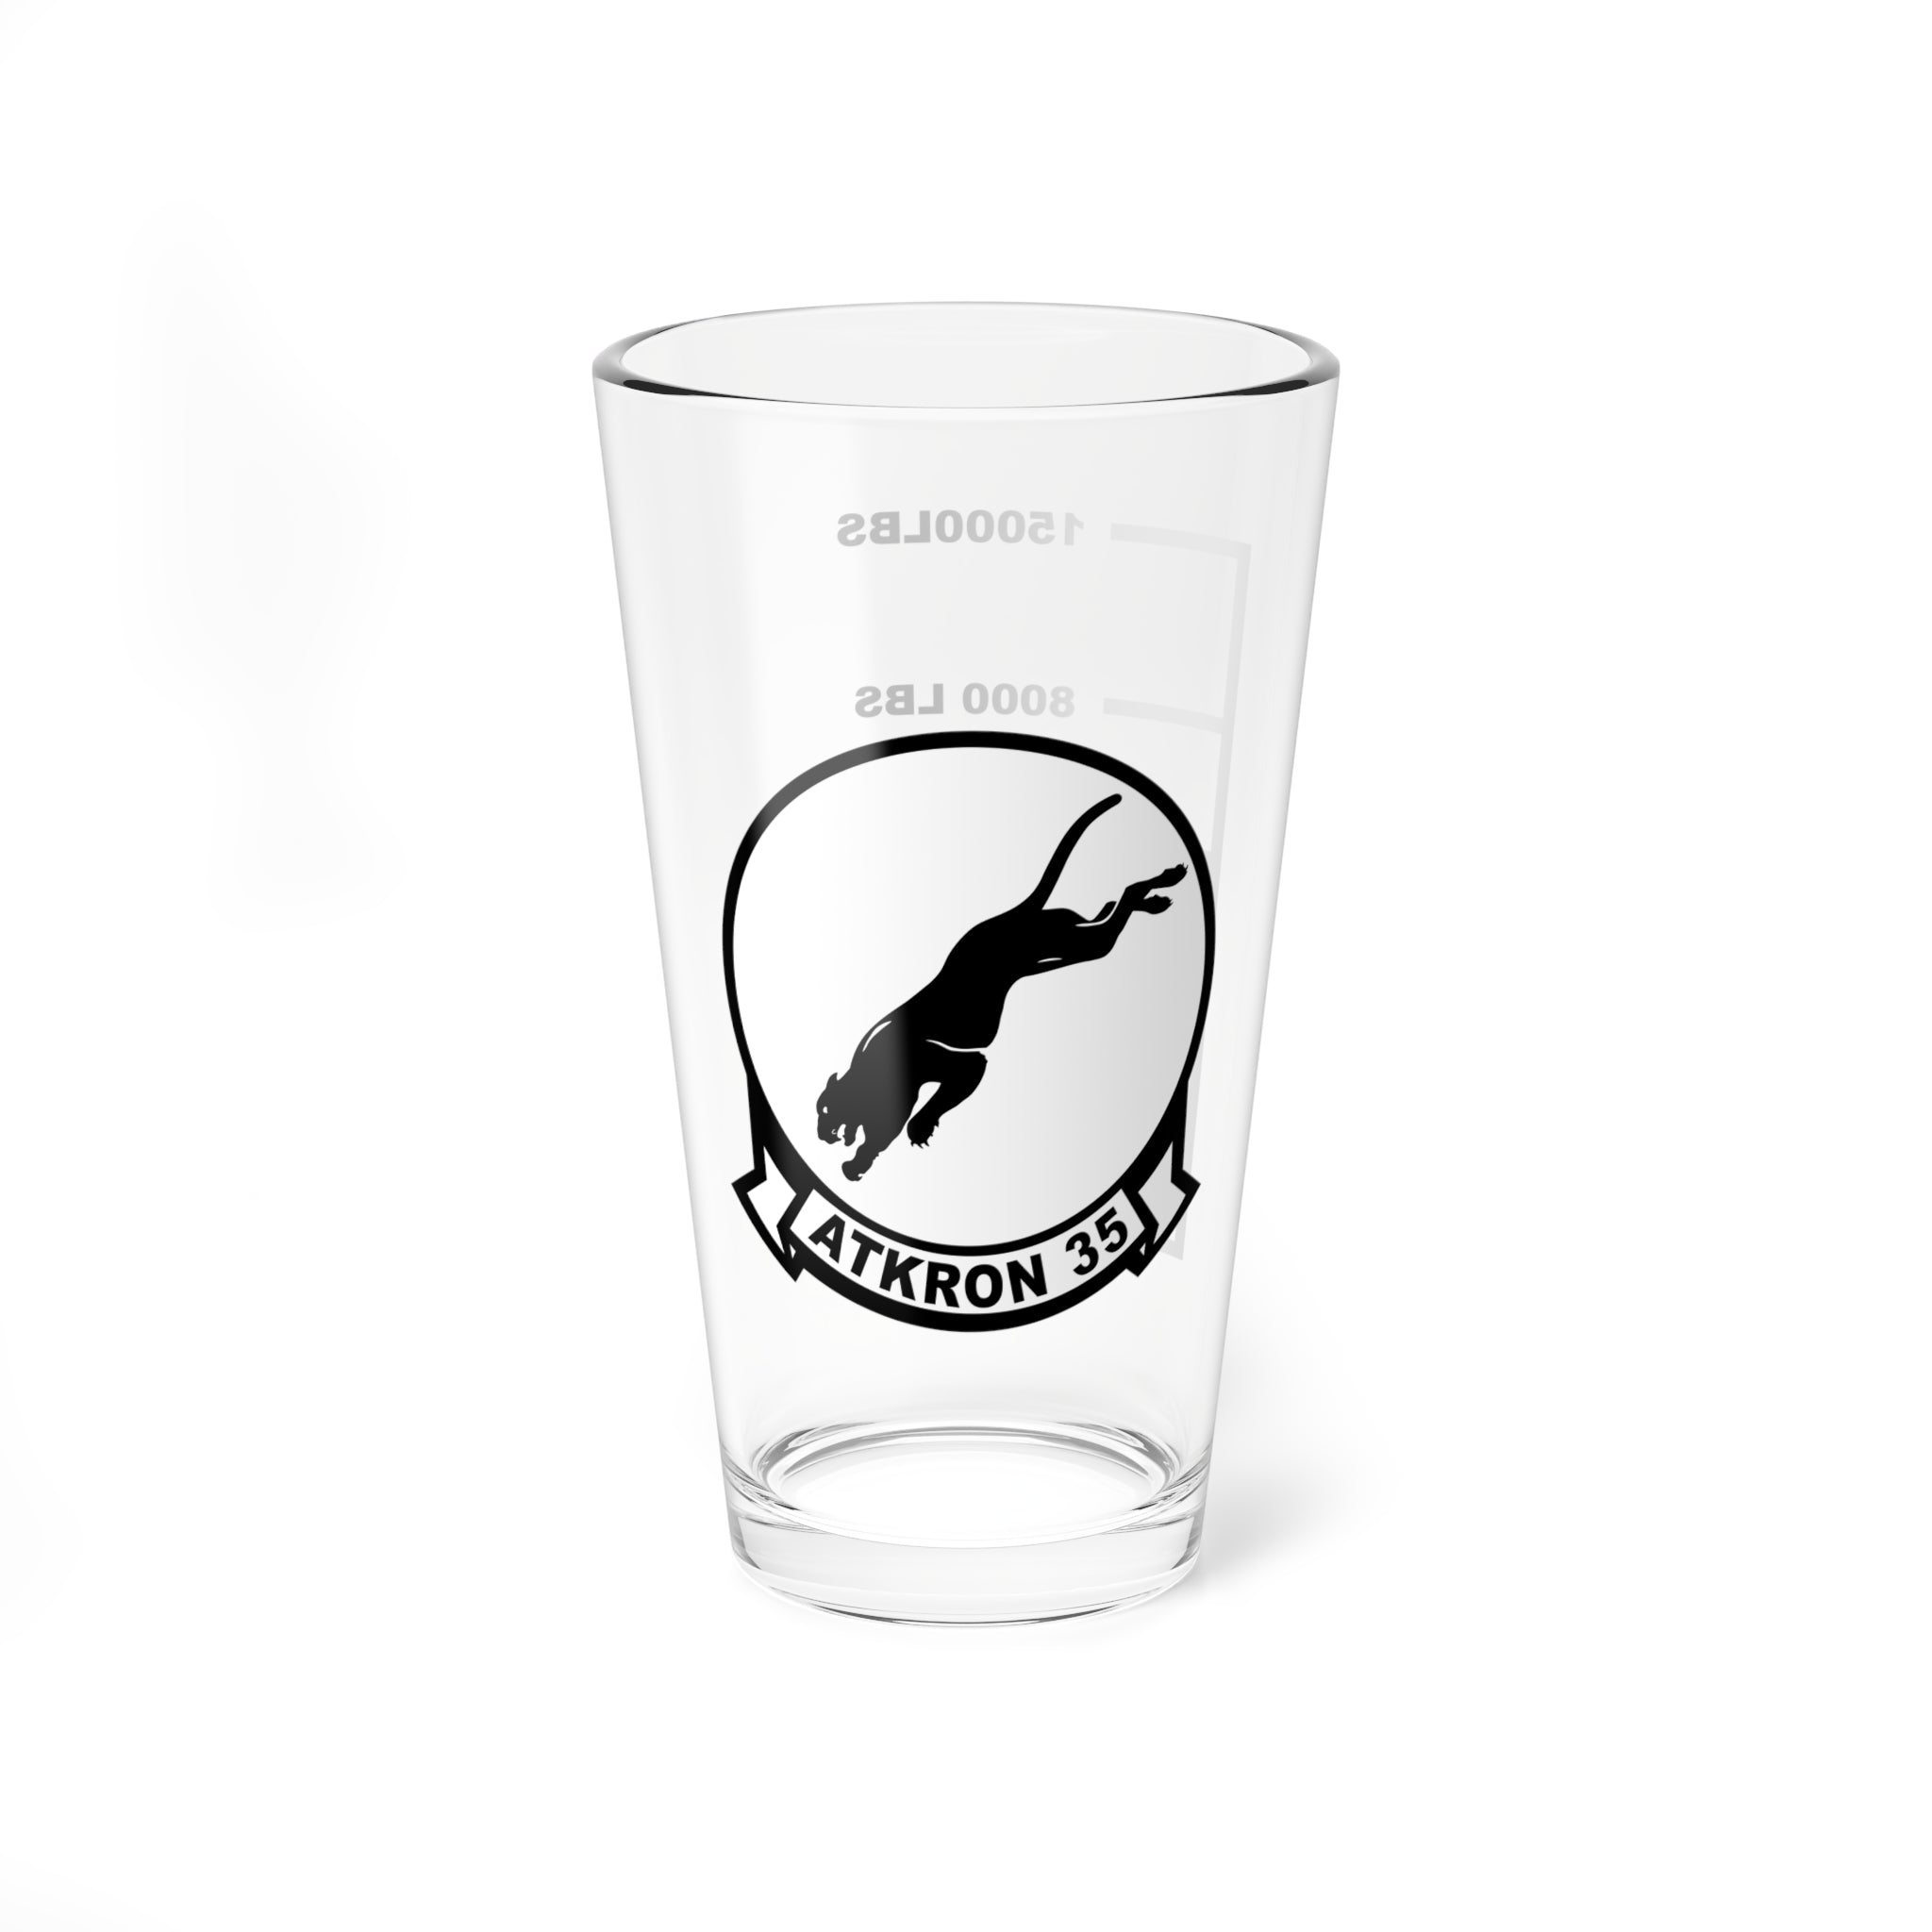 VA-35 "Black Panthers" Fuel Low Pint Glass, US Navy Attack Squadron flying the A-6 Intruder